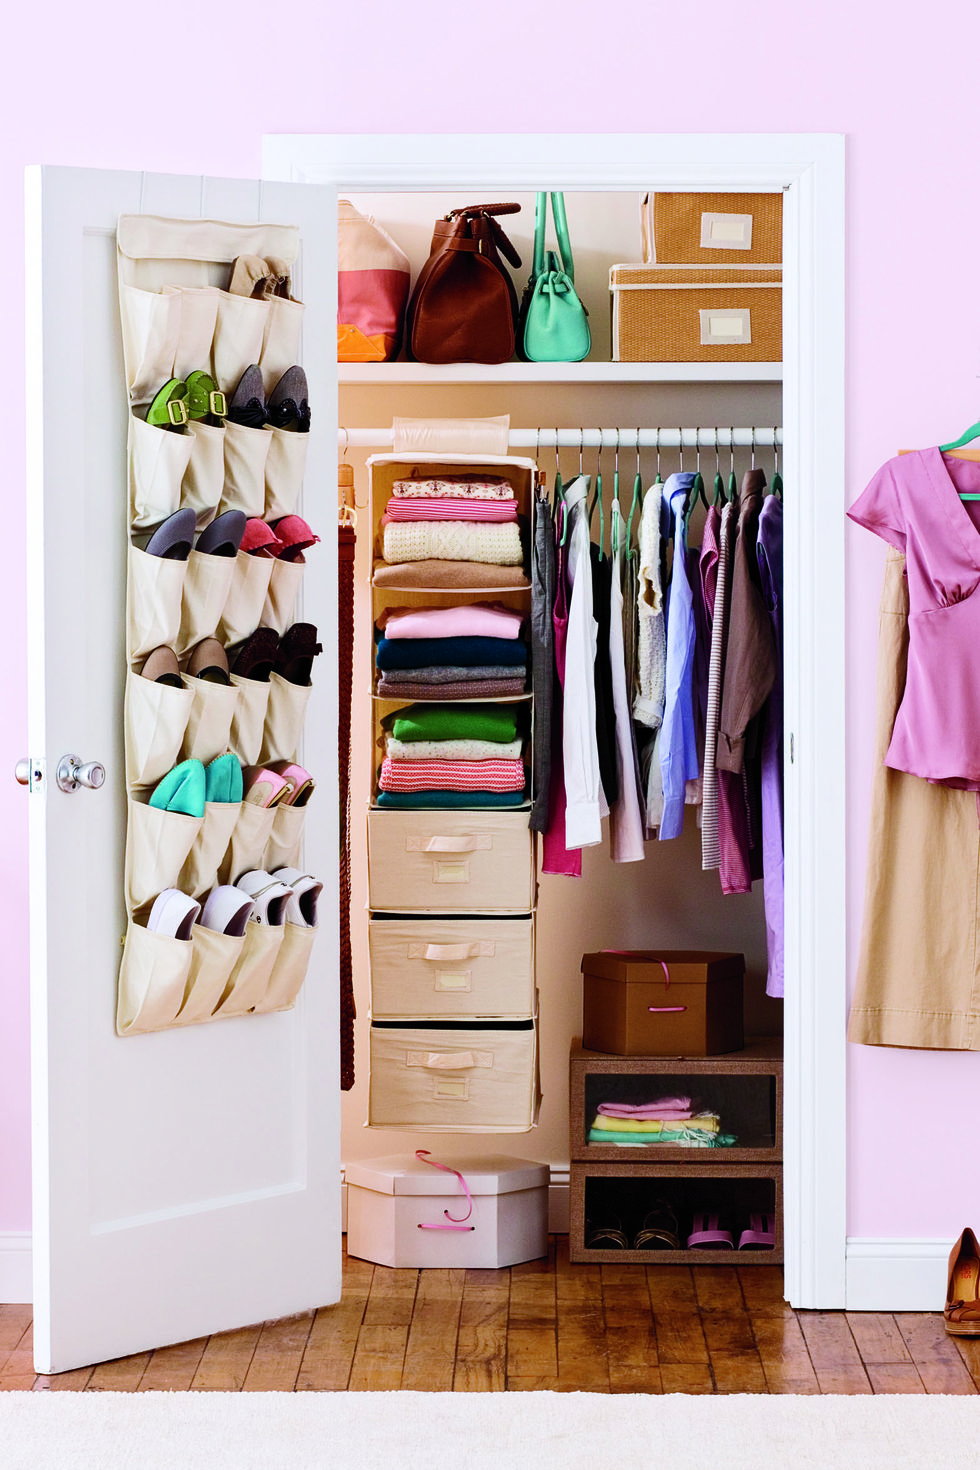 closet organization ideas, shoes in the over the door hanging organizer and clothes in the closet